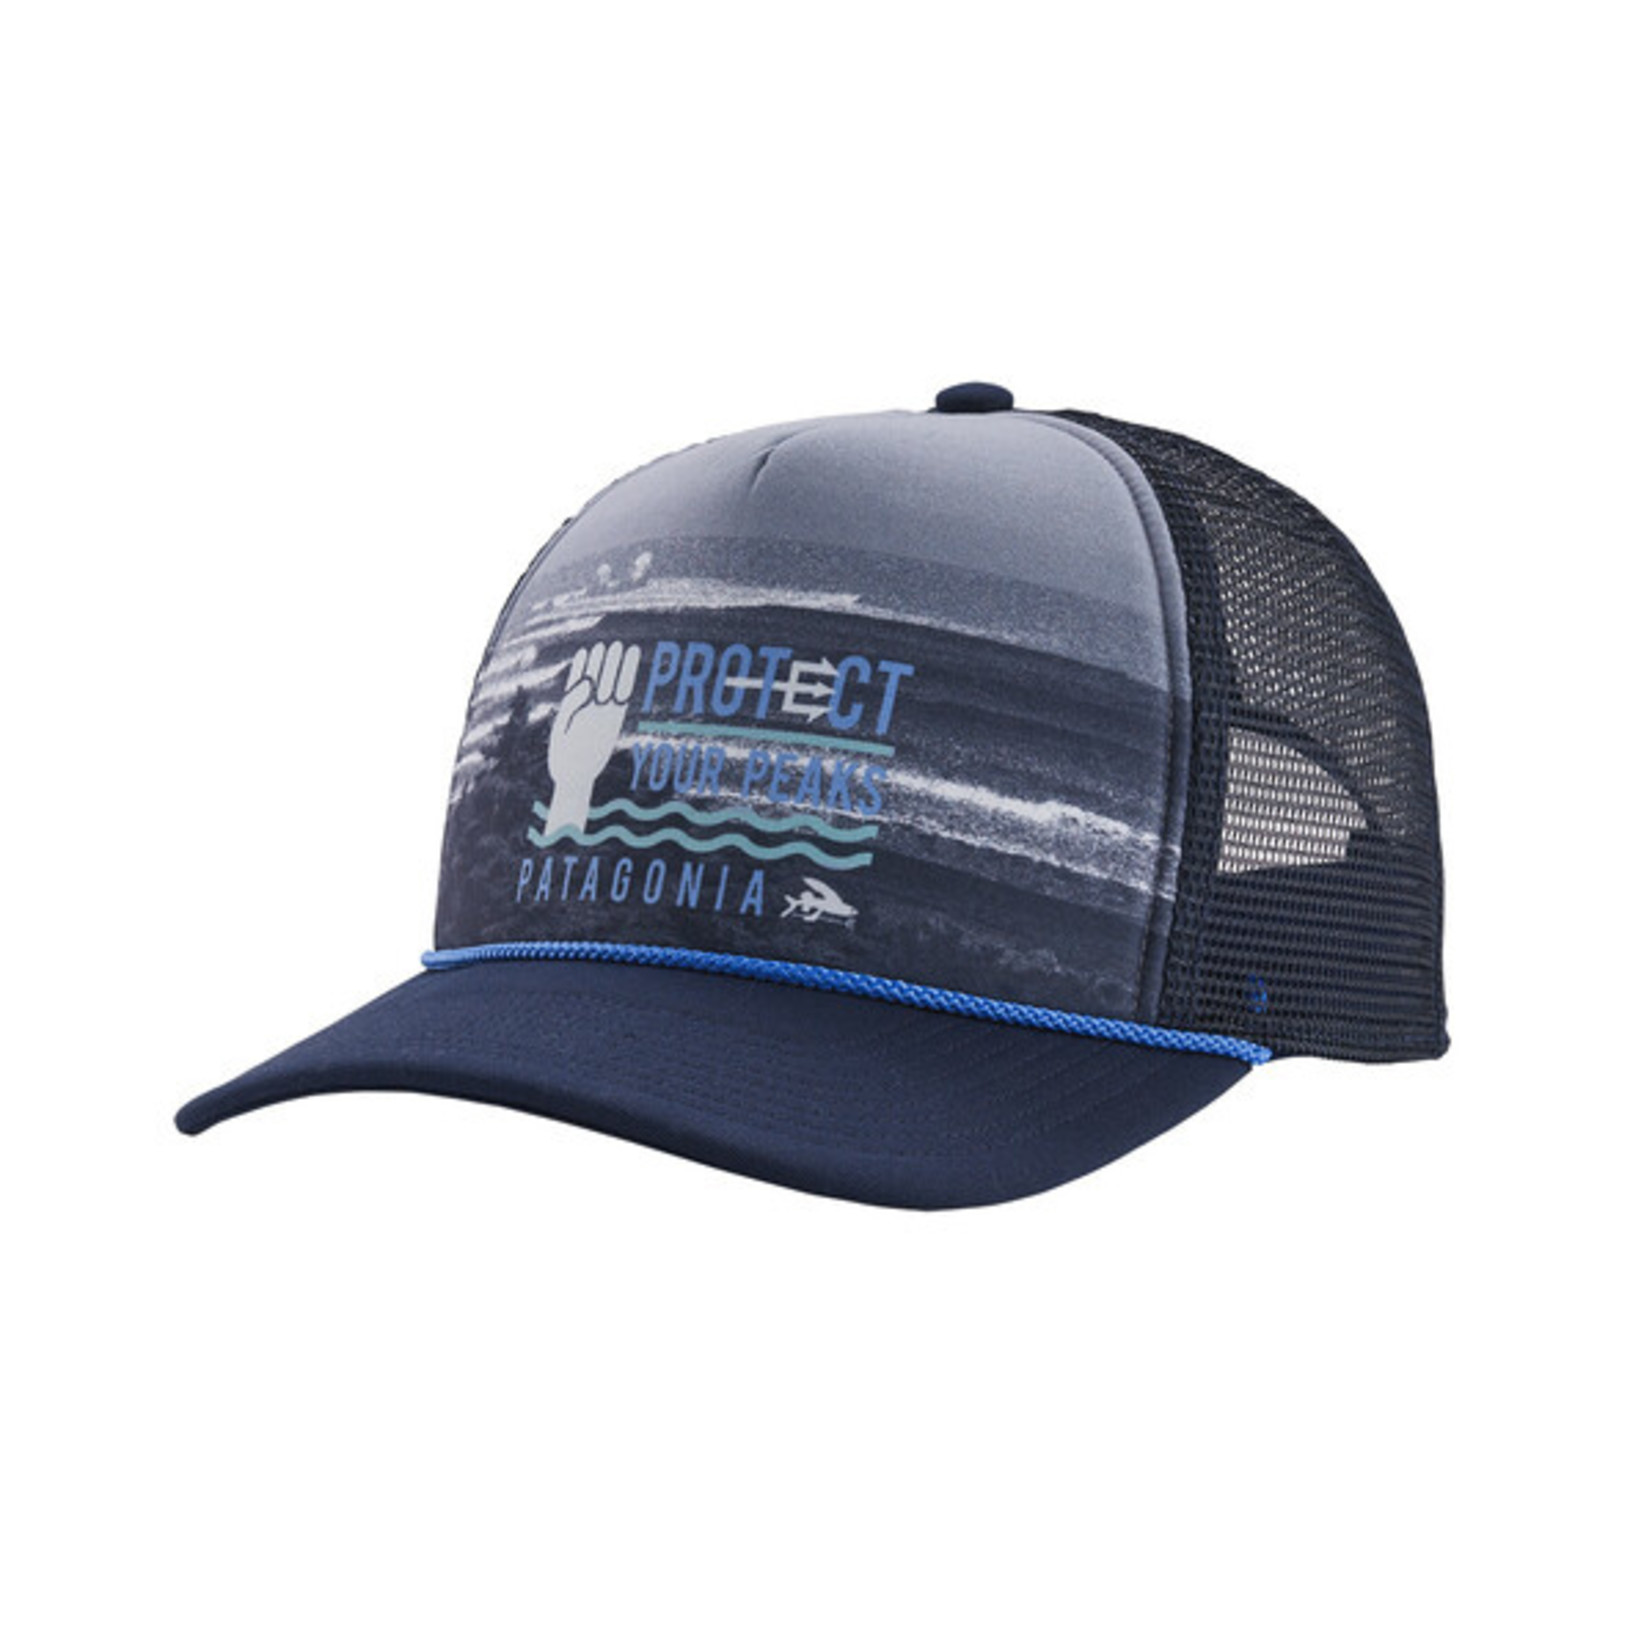 Patagonia Protect your peaks interstate hat